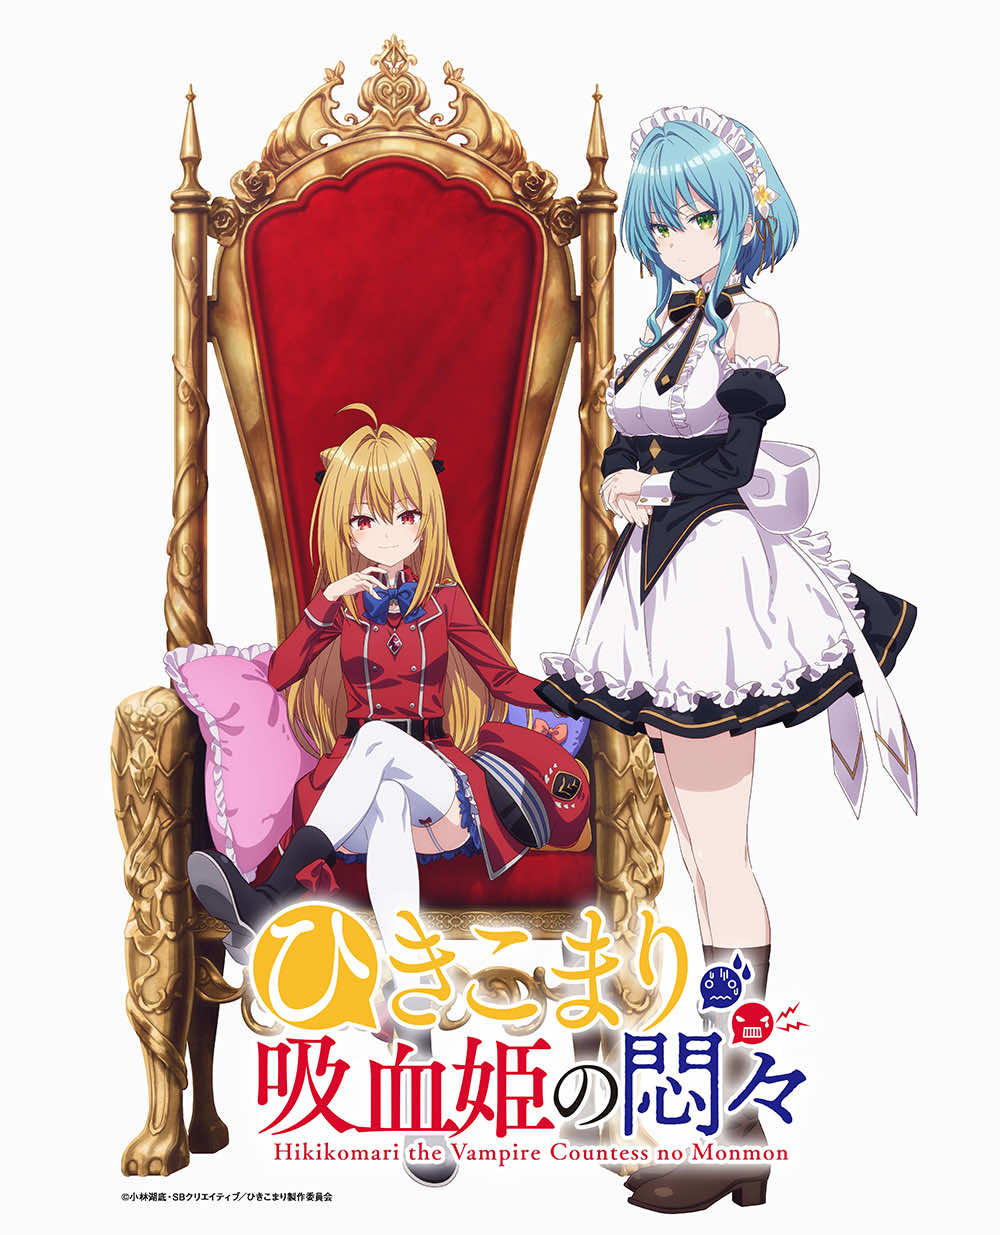 The Vexations of a Shut-In Vampire Princess, #anime #animerecommenda